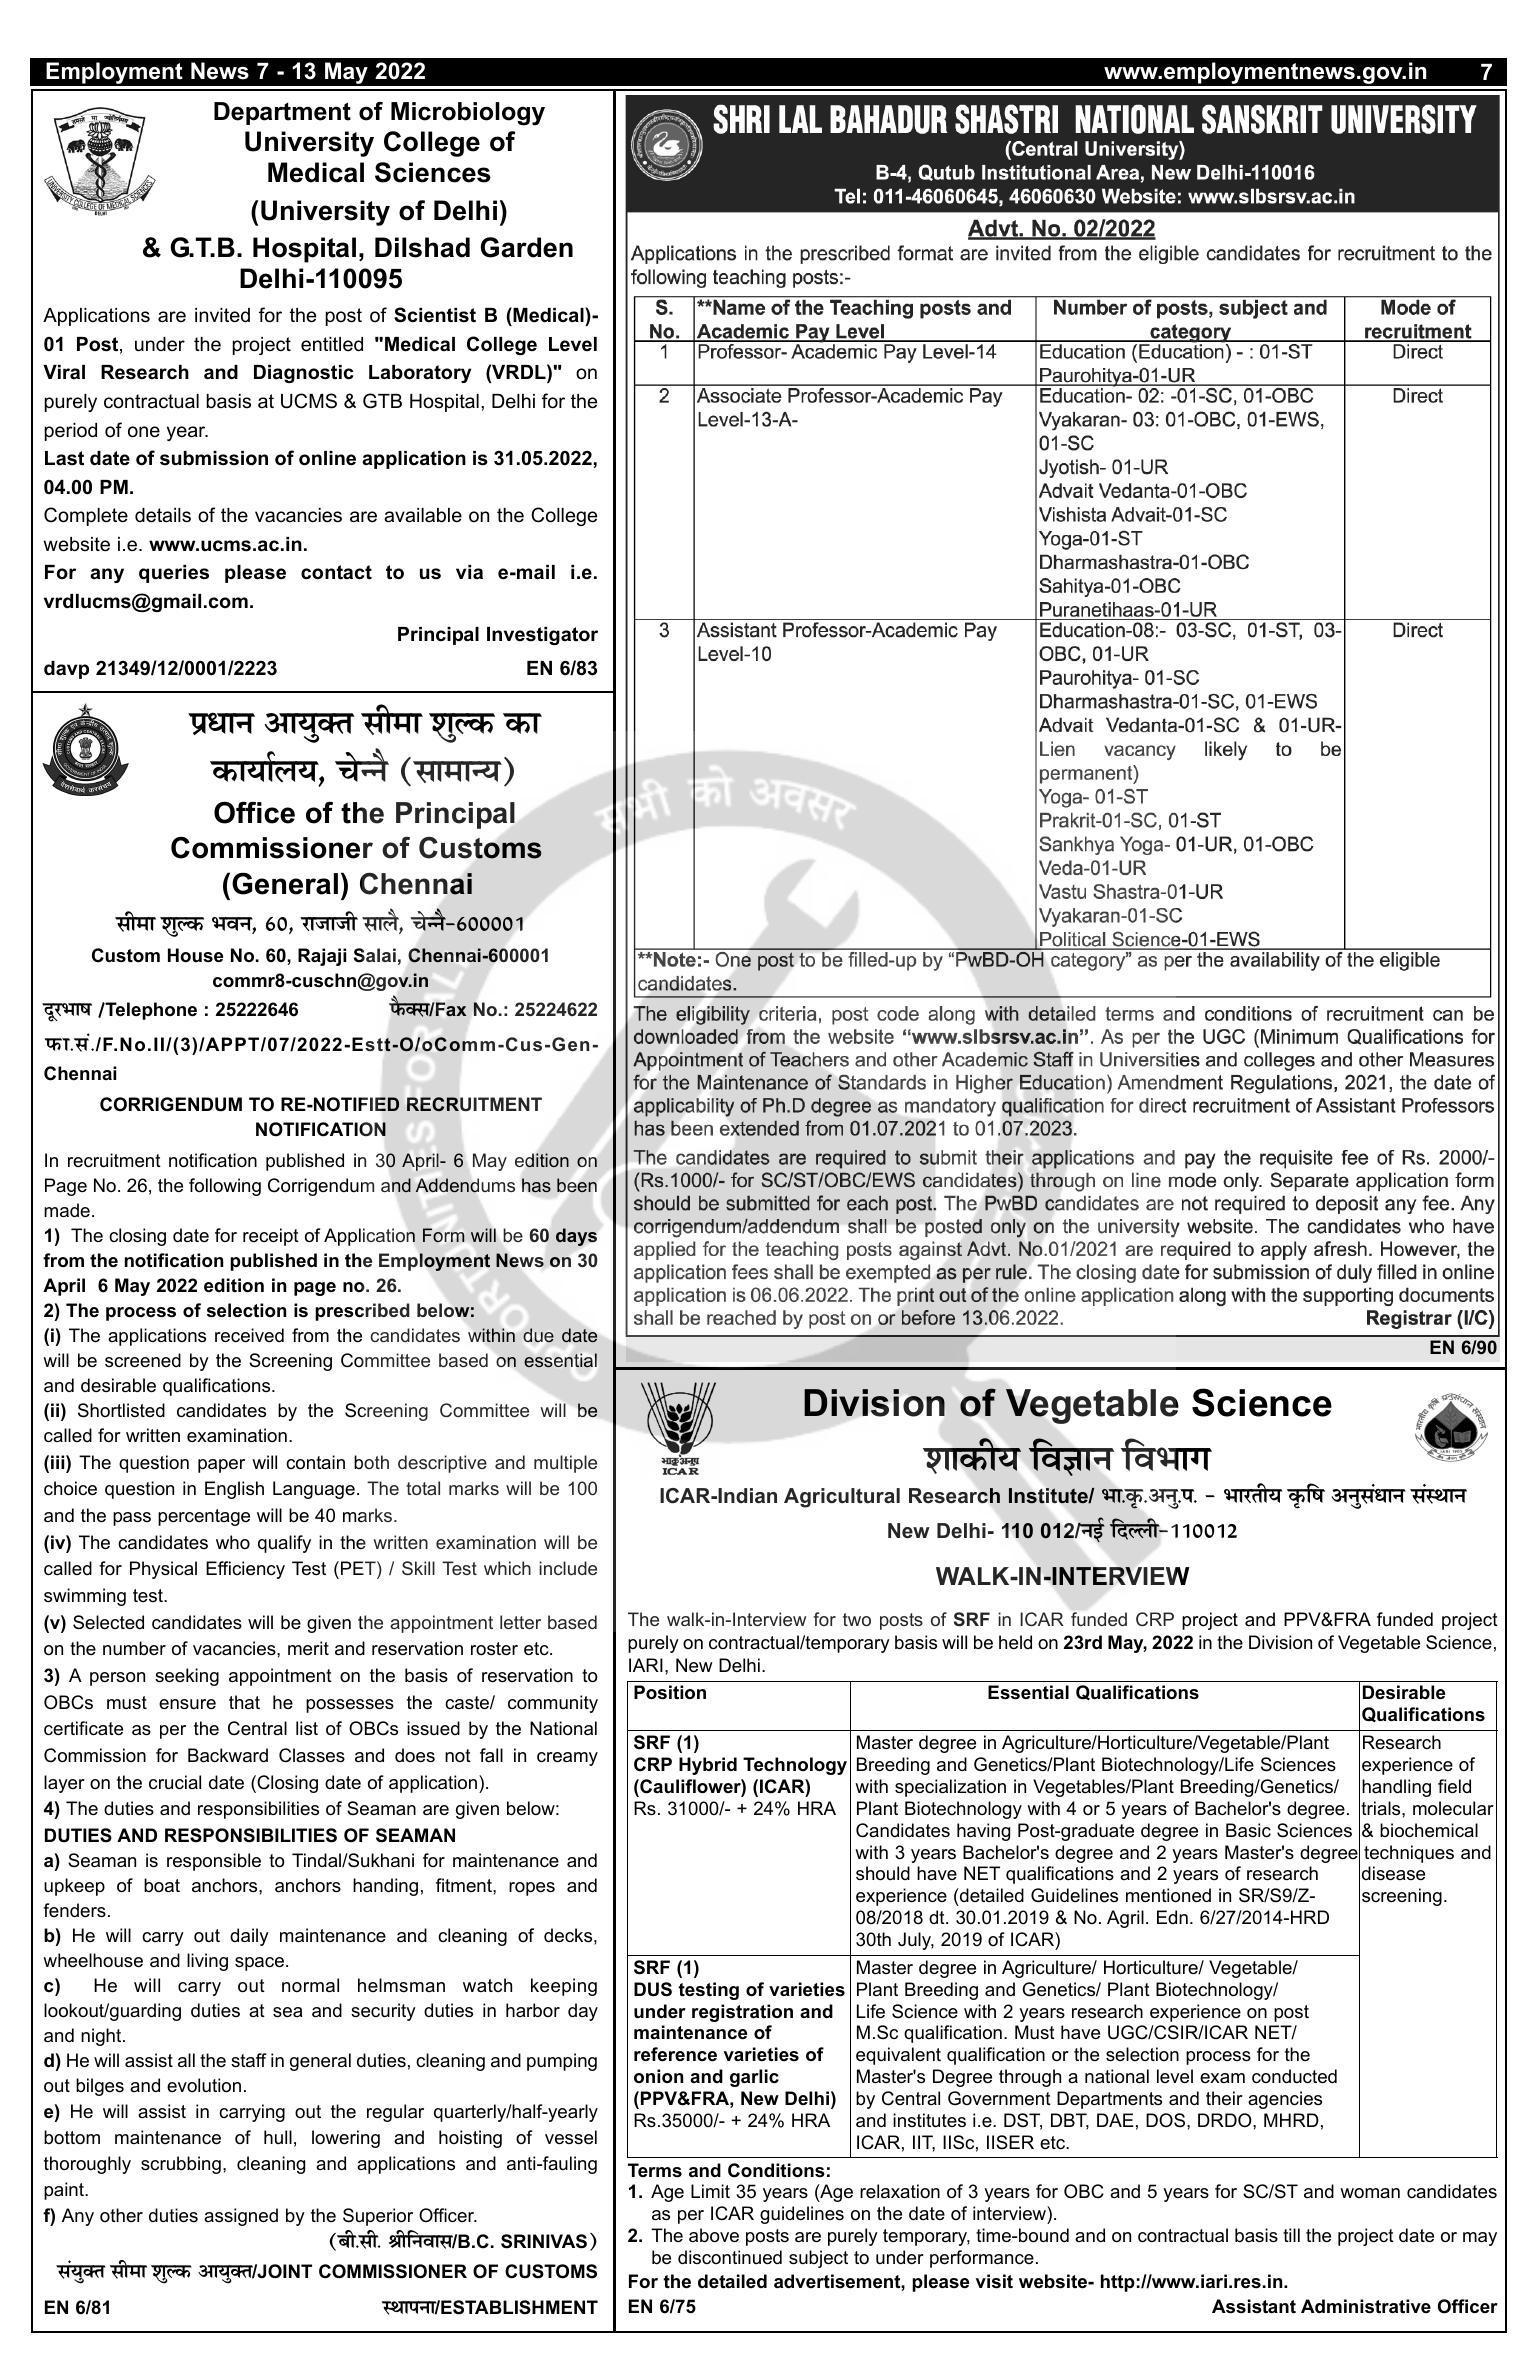 SLBSRSV Teaching Positions Recruitment 2022 - Page 1